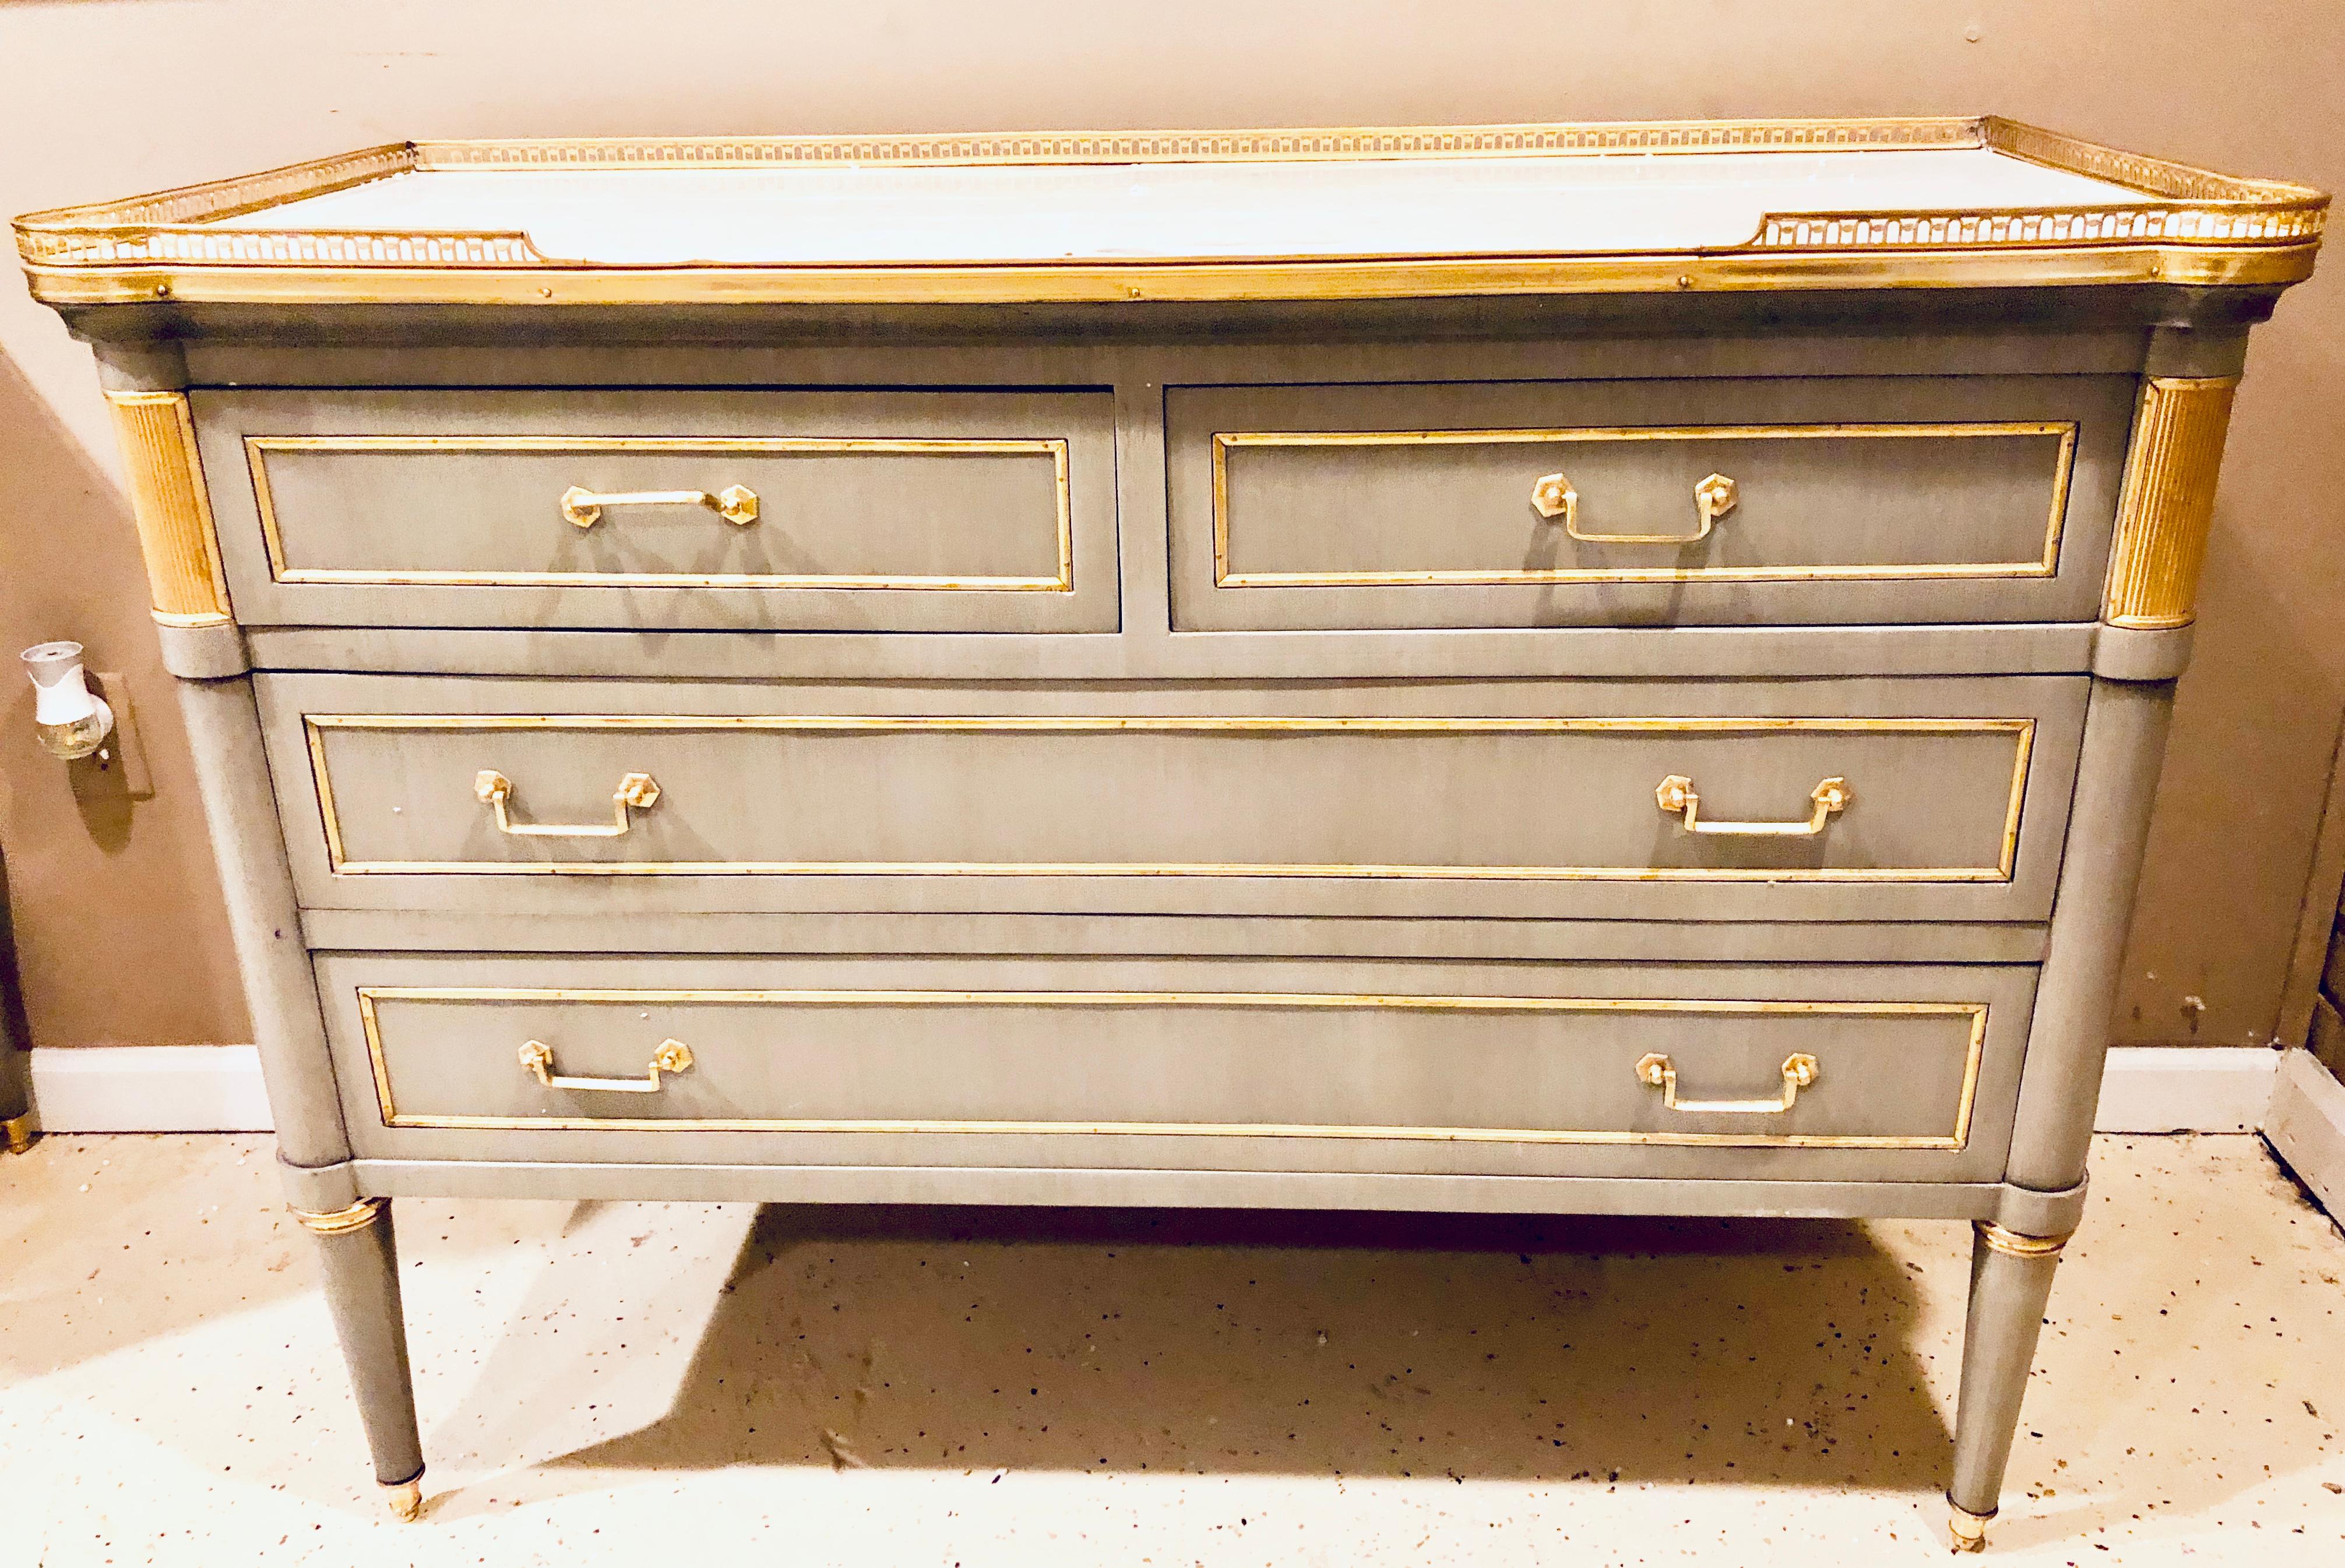 Maison Jansen style painted commodes, chests or nightstands a pair of stunning Louis XVI style fine bronze mounted chests each having a pierced bronze galleried marble top supported by two over two drawers all having a bronze frame and pulls. The